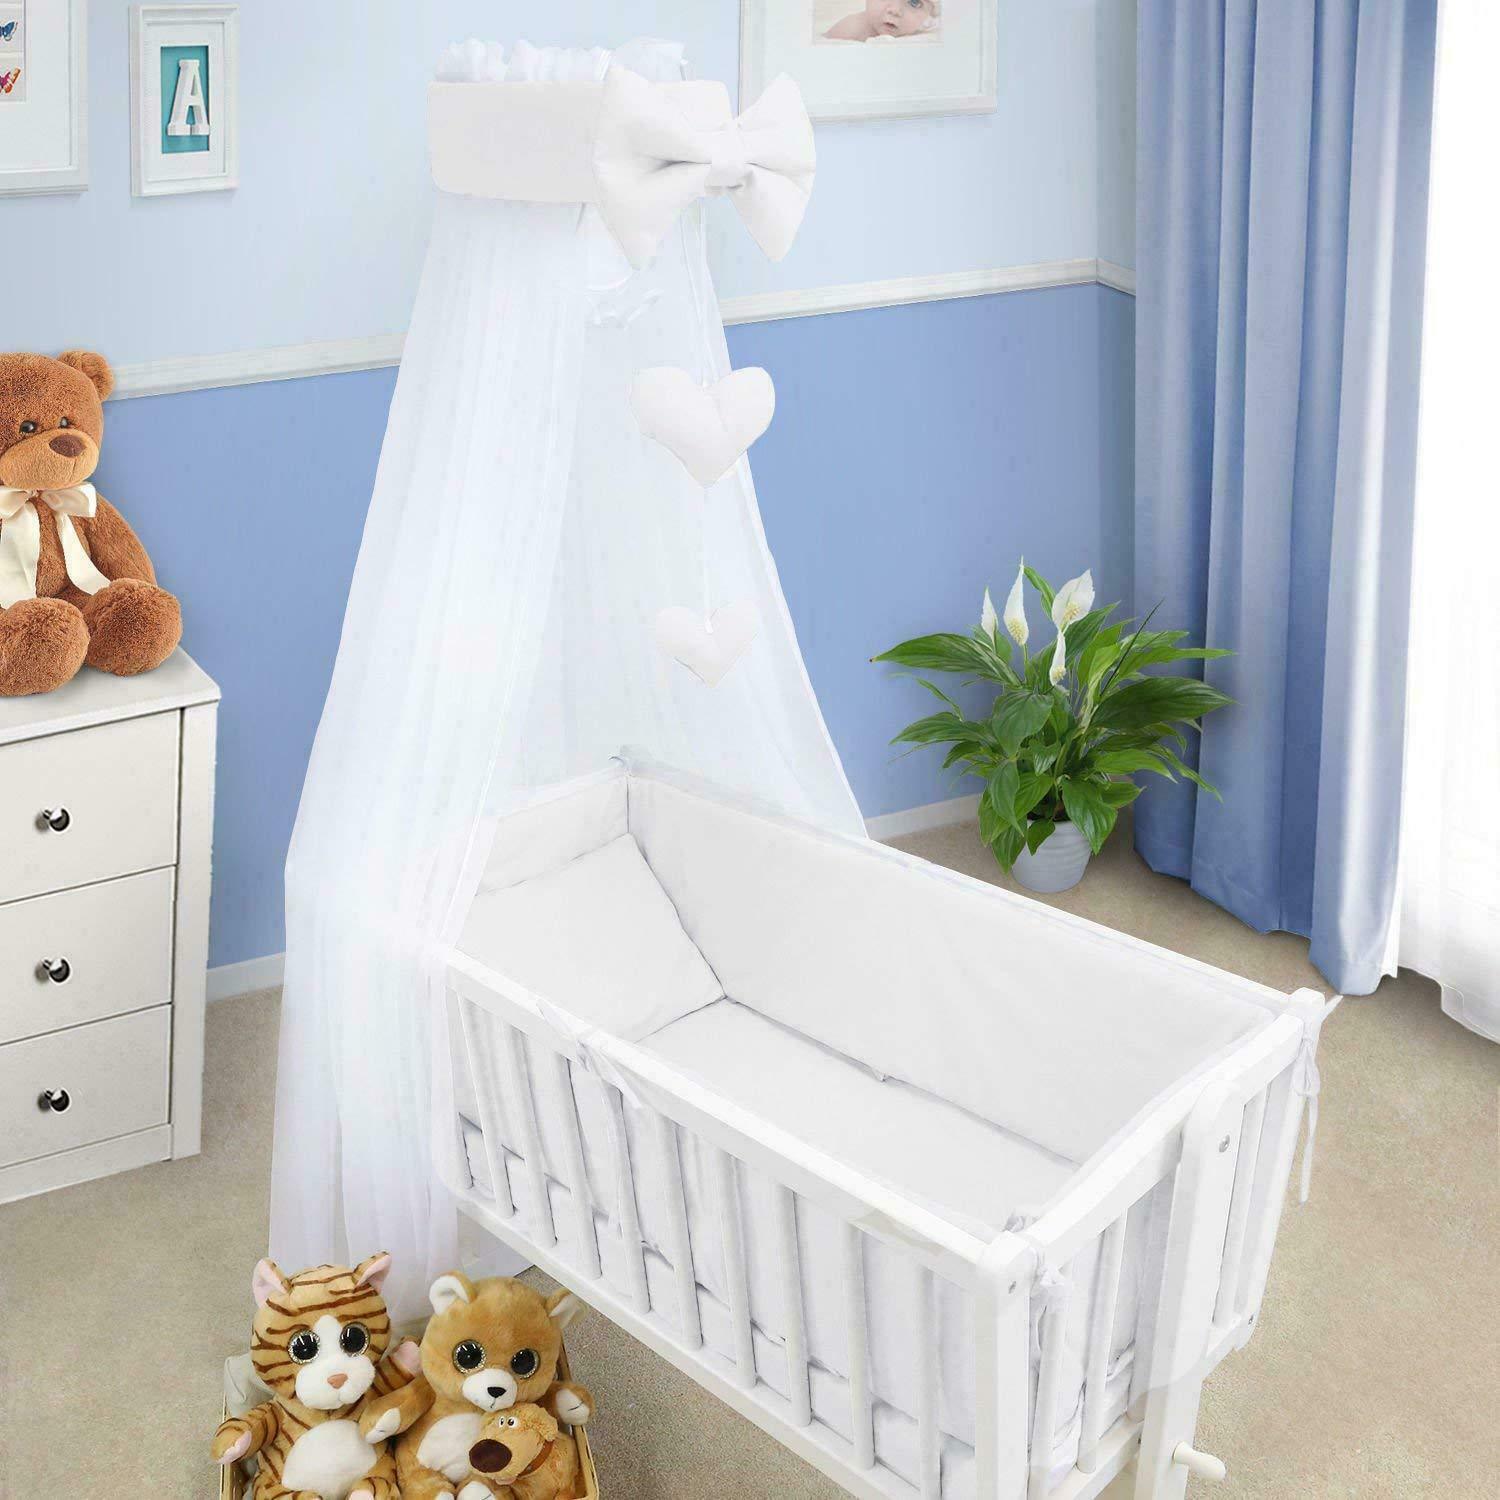 Baby Cot Bedding Set - 10 Piece Including Cot Bumper, Pillow, Duvet and Canopy to Fit 90x40cm Crib White - 100% Cotton